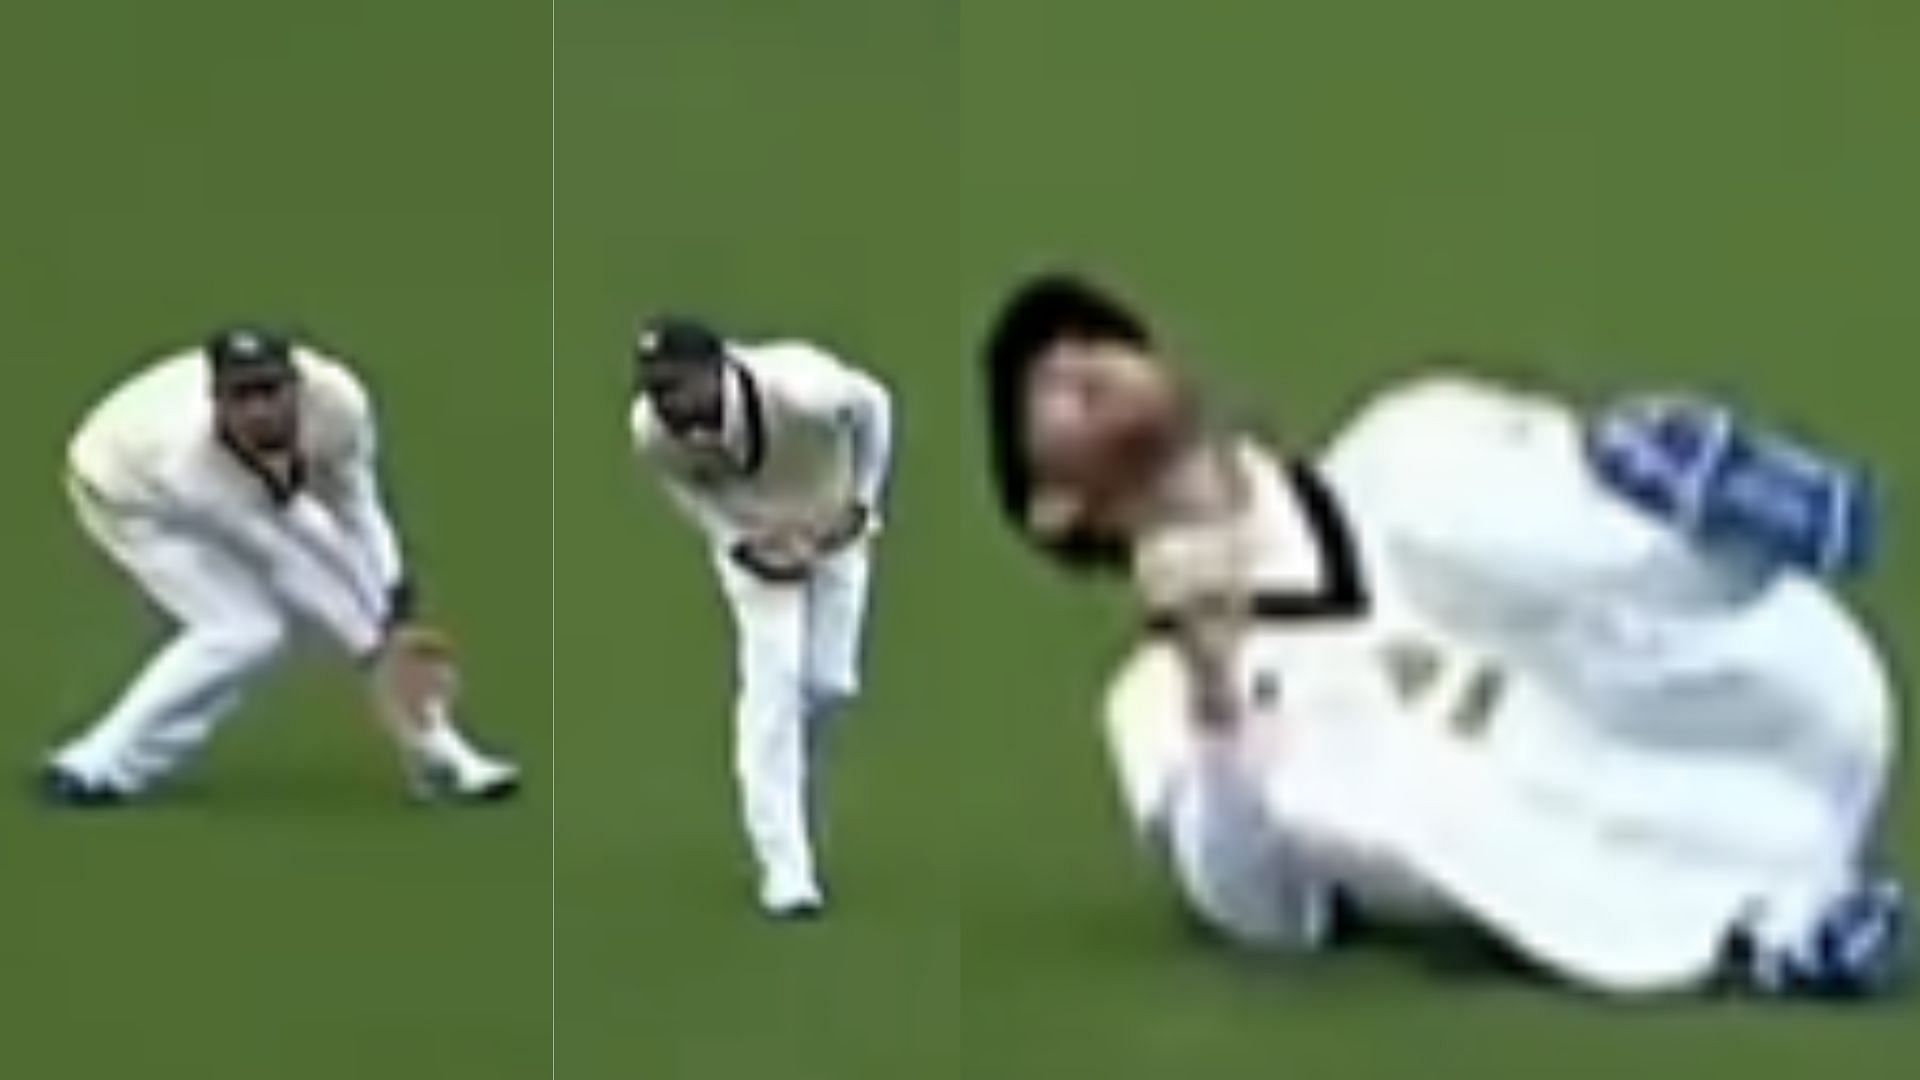 [WATCH] Glenn Maxwell taken off the field with a wrist injury on his return to competitive cricket 